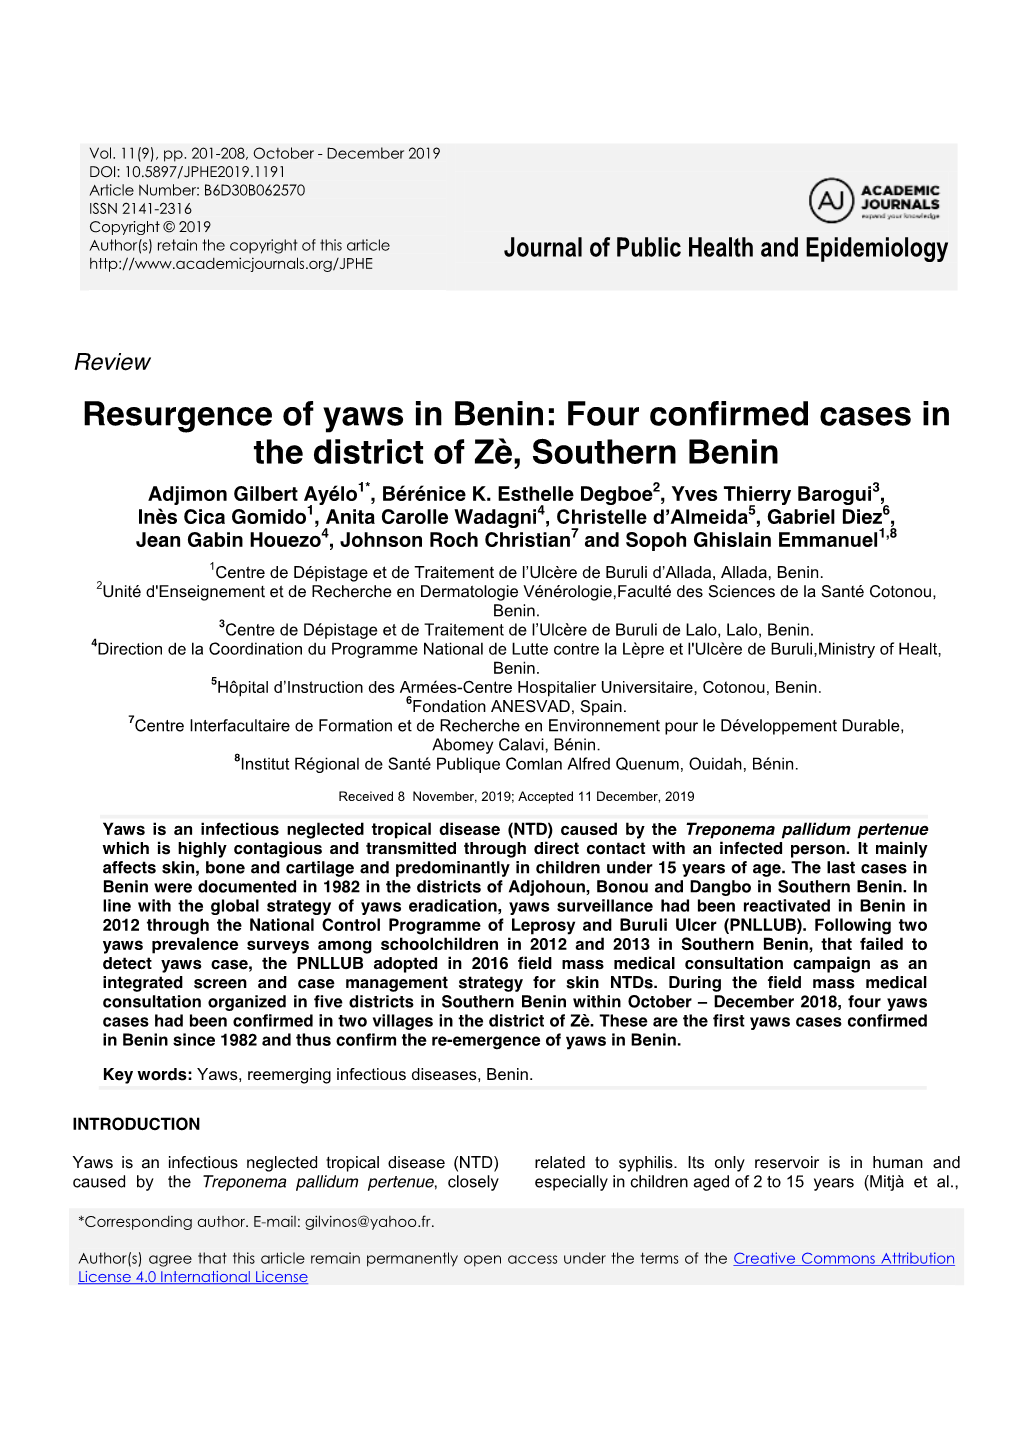 Resurgence of Yaws in Benin: Four Confirmed Cases in the District of Zè, Southern Benin